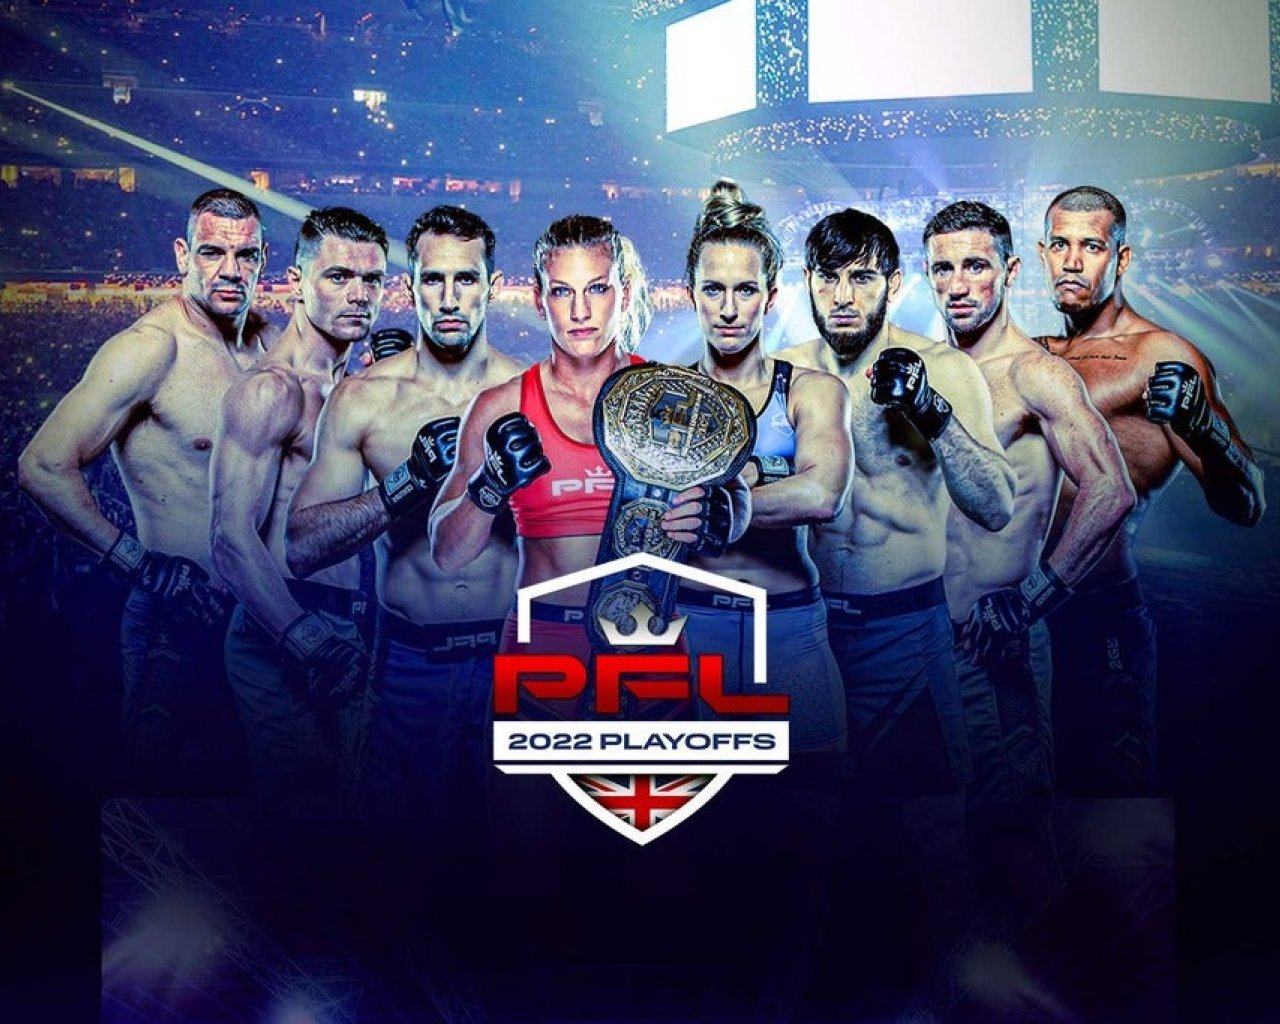 Professional Fighters League MMA